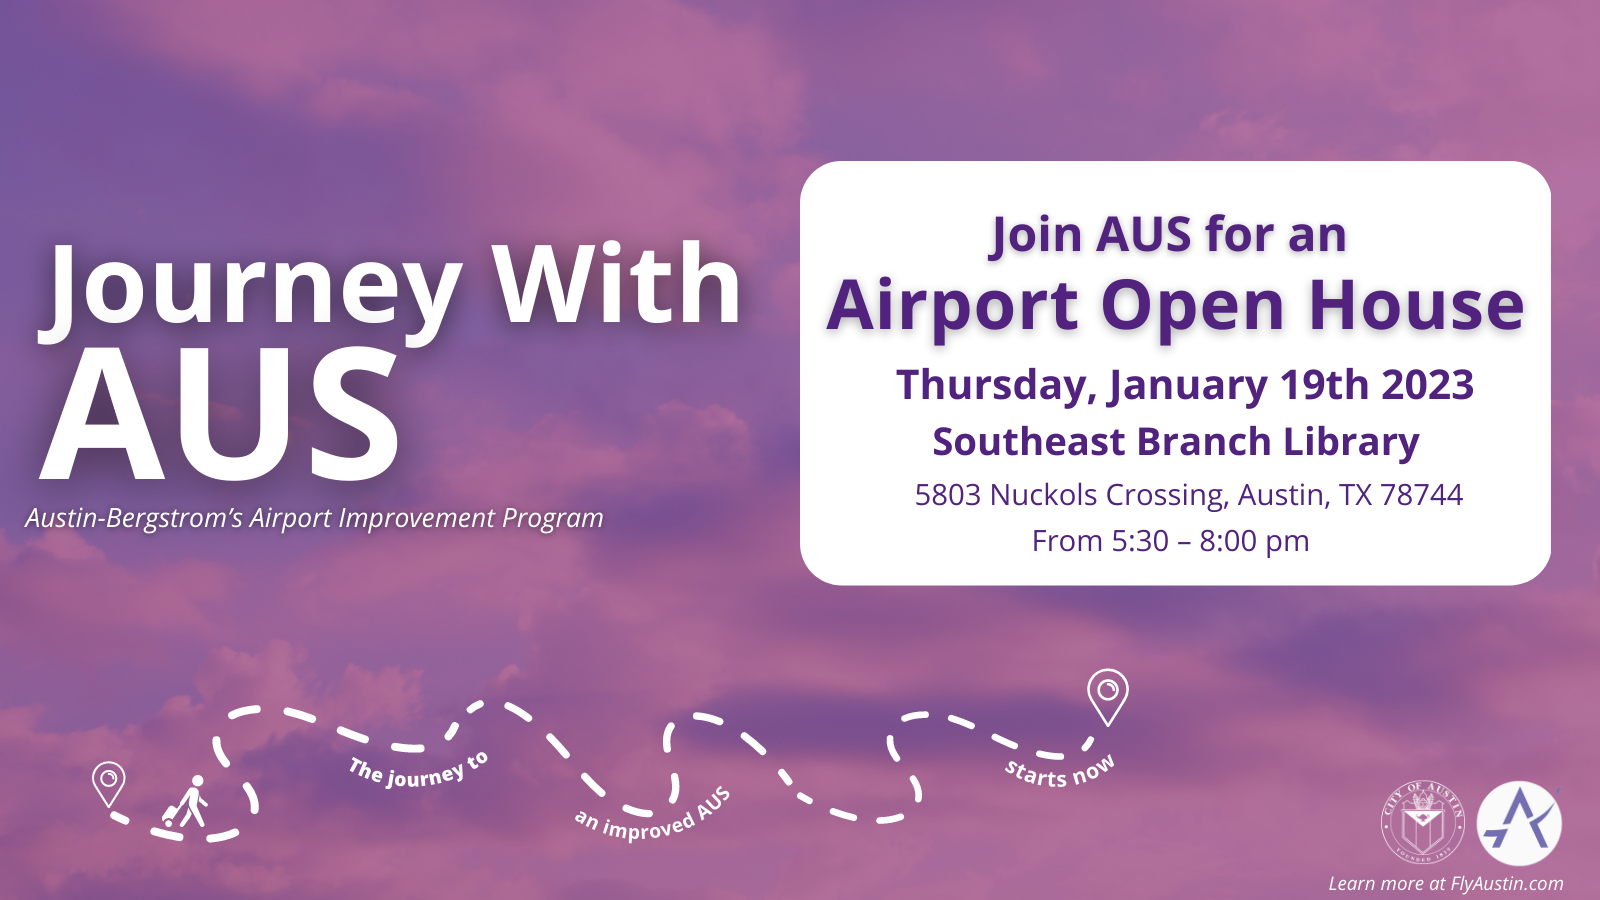 A graphic with text that reads "Journey with AUS - Austin-Begrstrom's Airport Improvement Program. Join AUS for an Airport Open House Thursday, January 19th 2023. Southeast Branch Library, 5803 Nuckols Crossing, Austin , TX 78744. From 5:30 - 8:00 PM